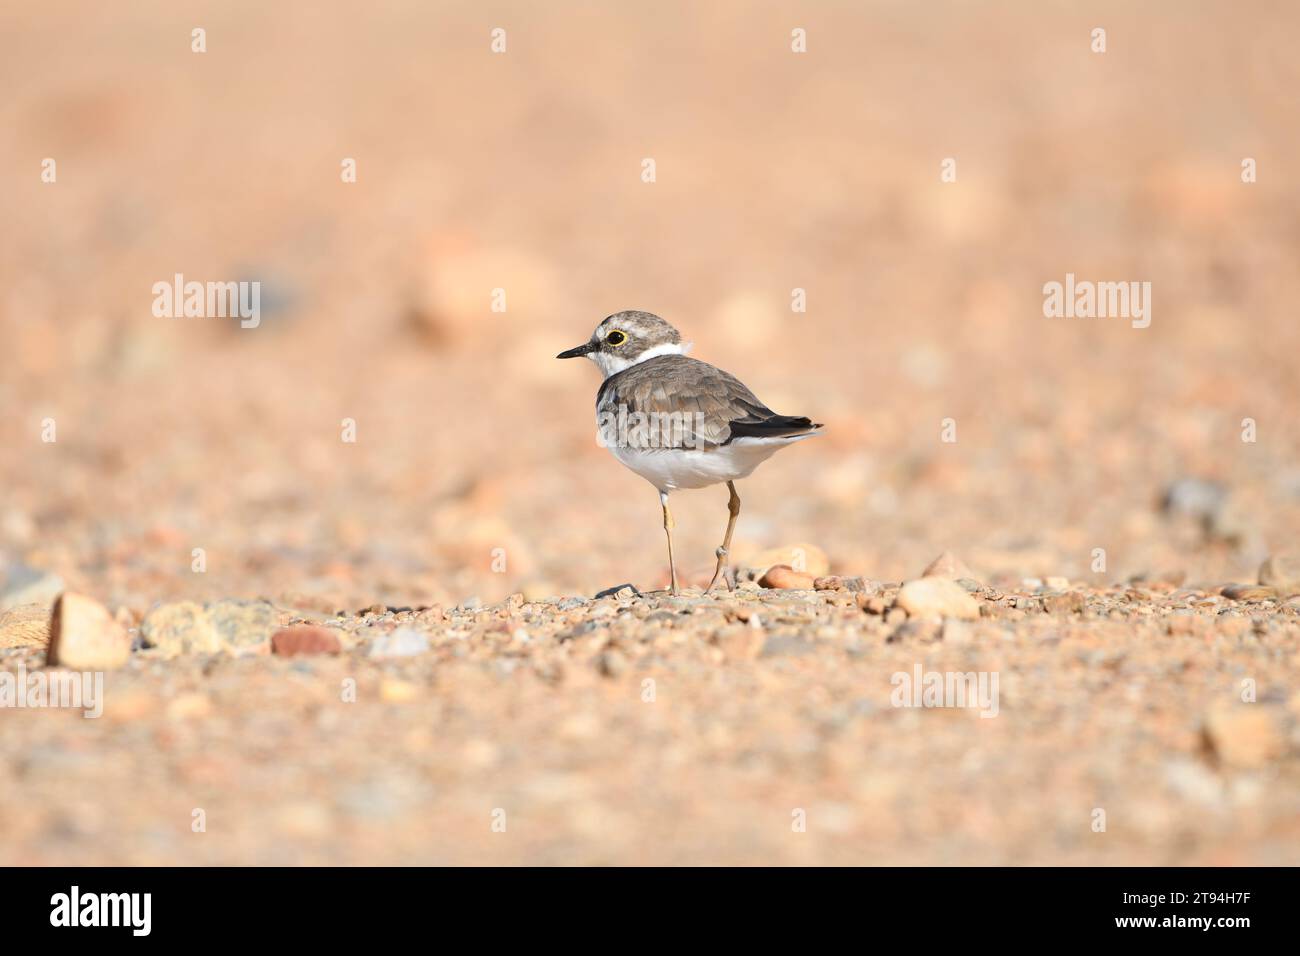 Little ringed plover standing alone in the sand Stock Photo